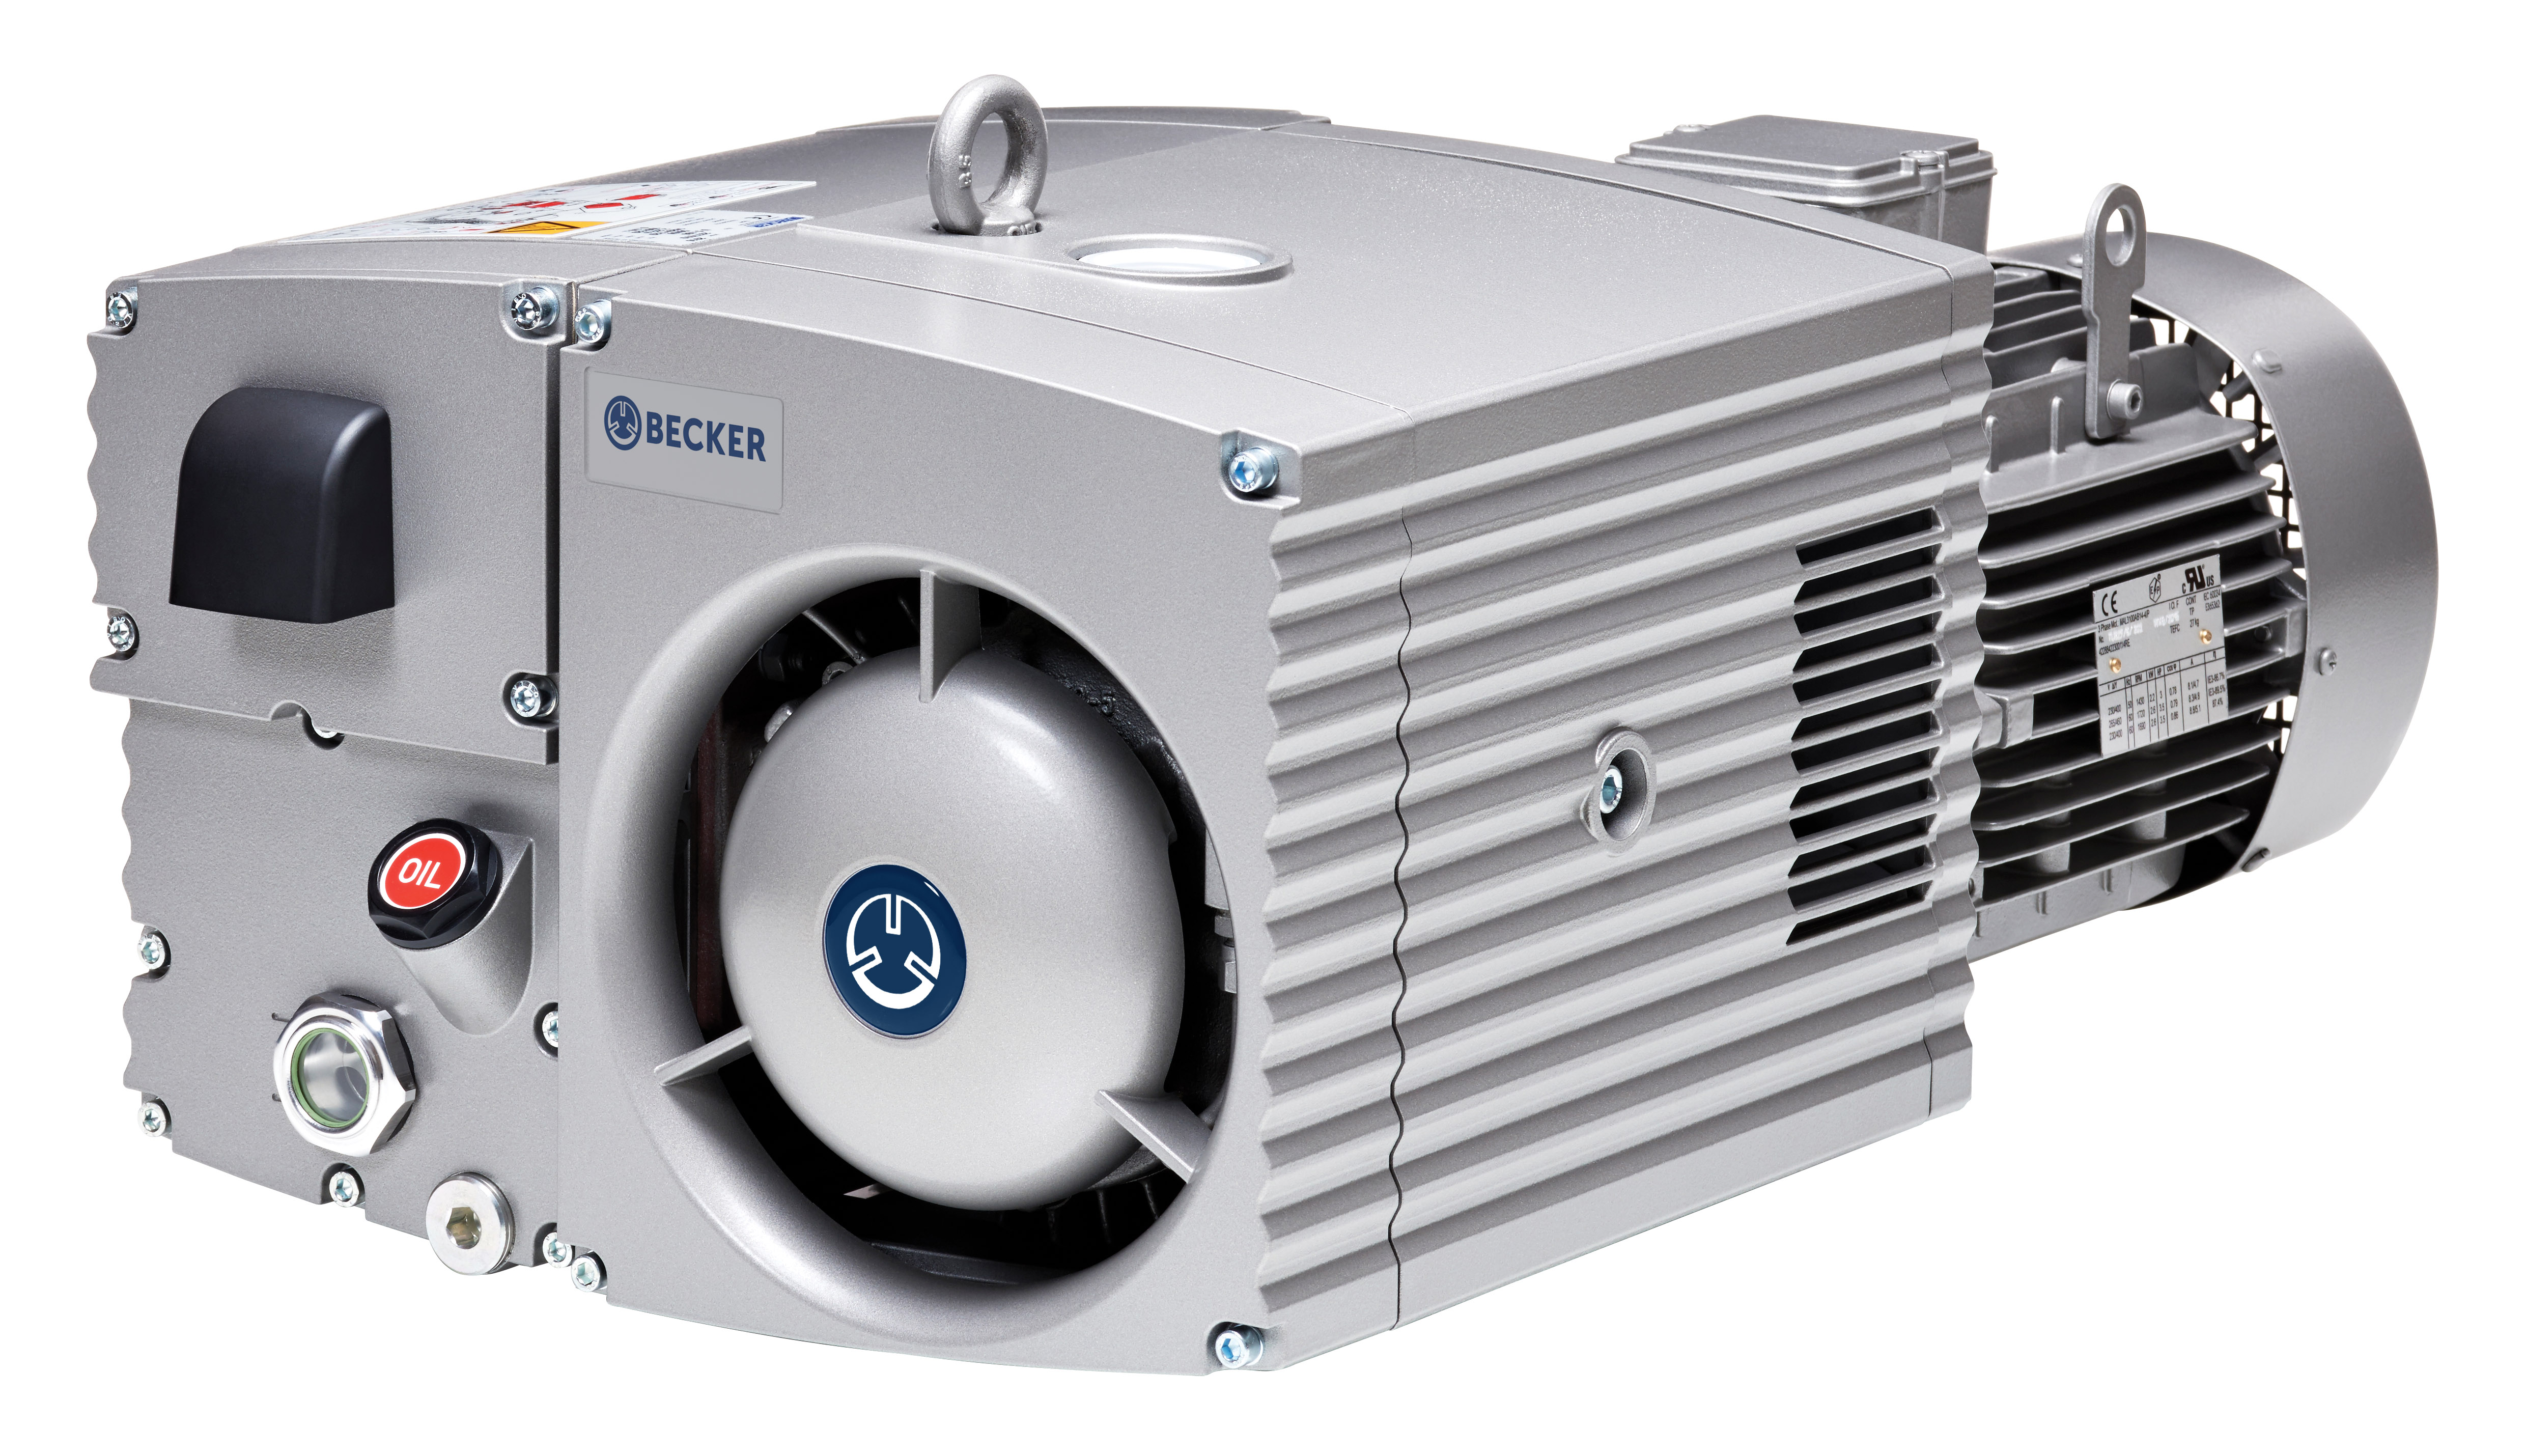 Becker's U Series vacuum pumps are excellent for continuous operation in the toughest conditions